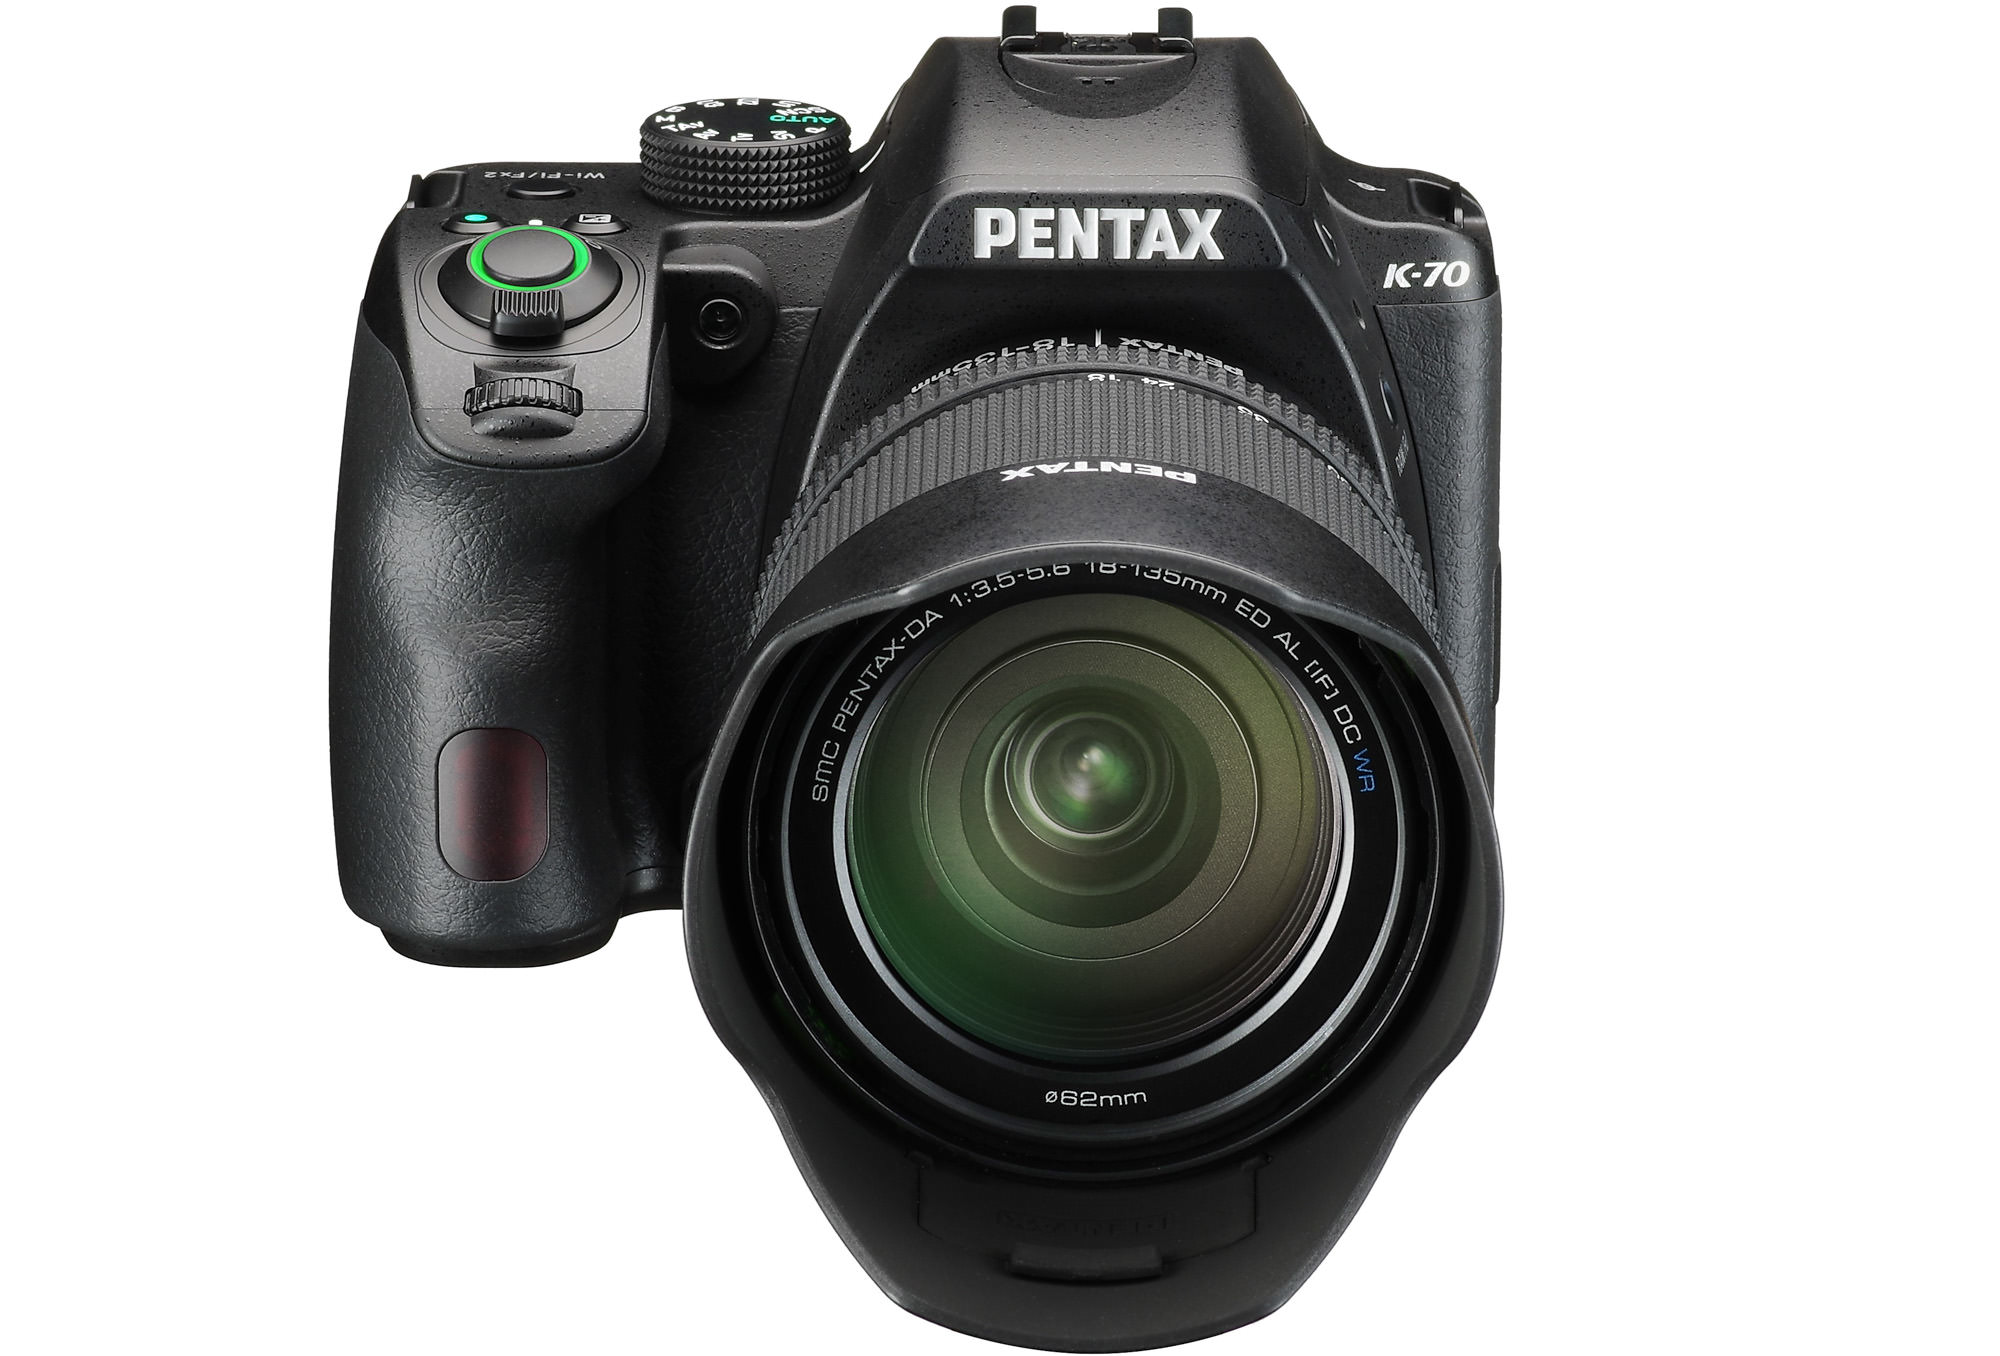 The Pentax K-70 Is The Feature-Rich & Robust DSLR Many Asked For, But Won’t Buy